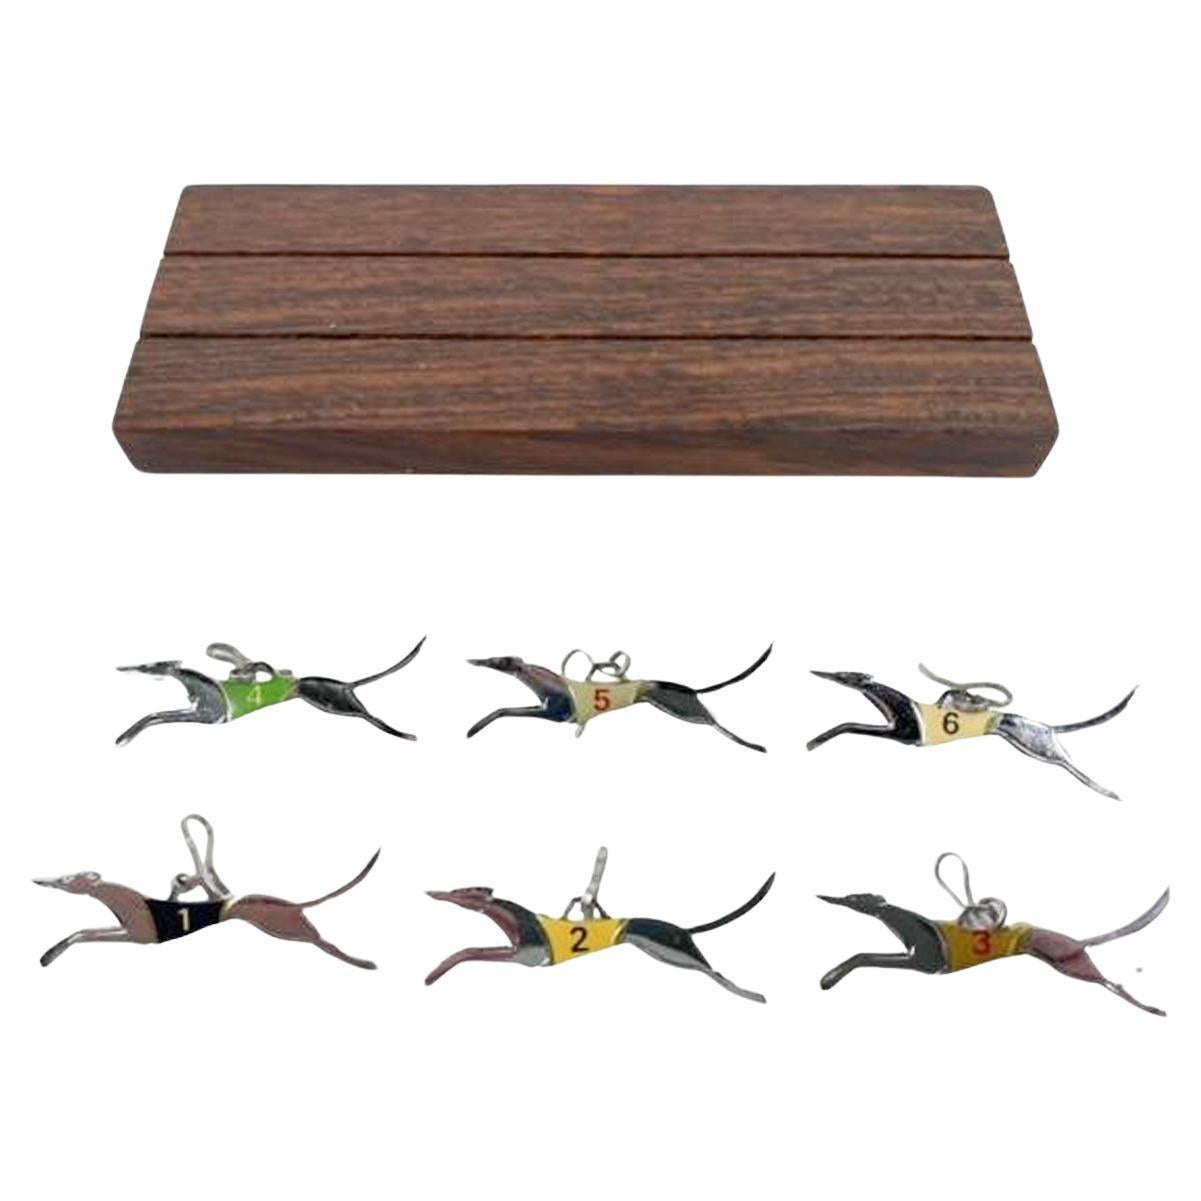 Set of Greyhound Dog Race Drinks Markers Numbered 1 - 6 in a Wooden Stand For Sale